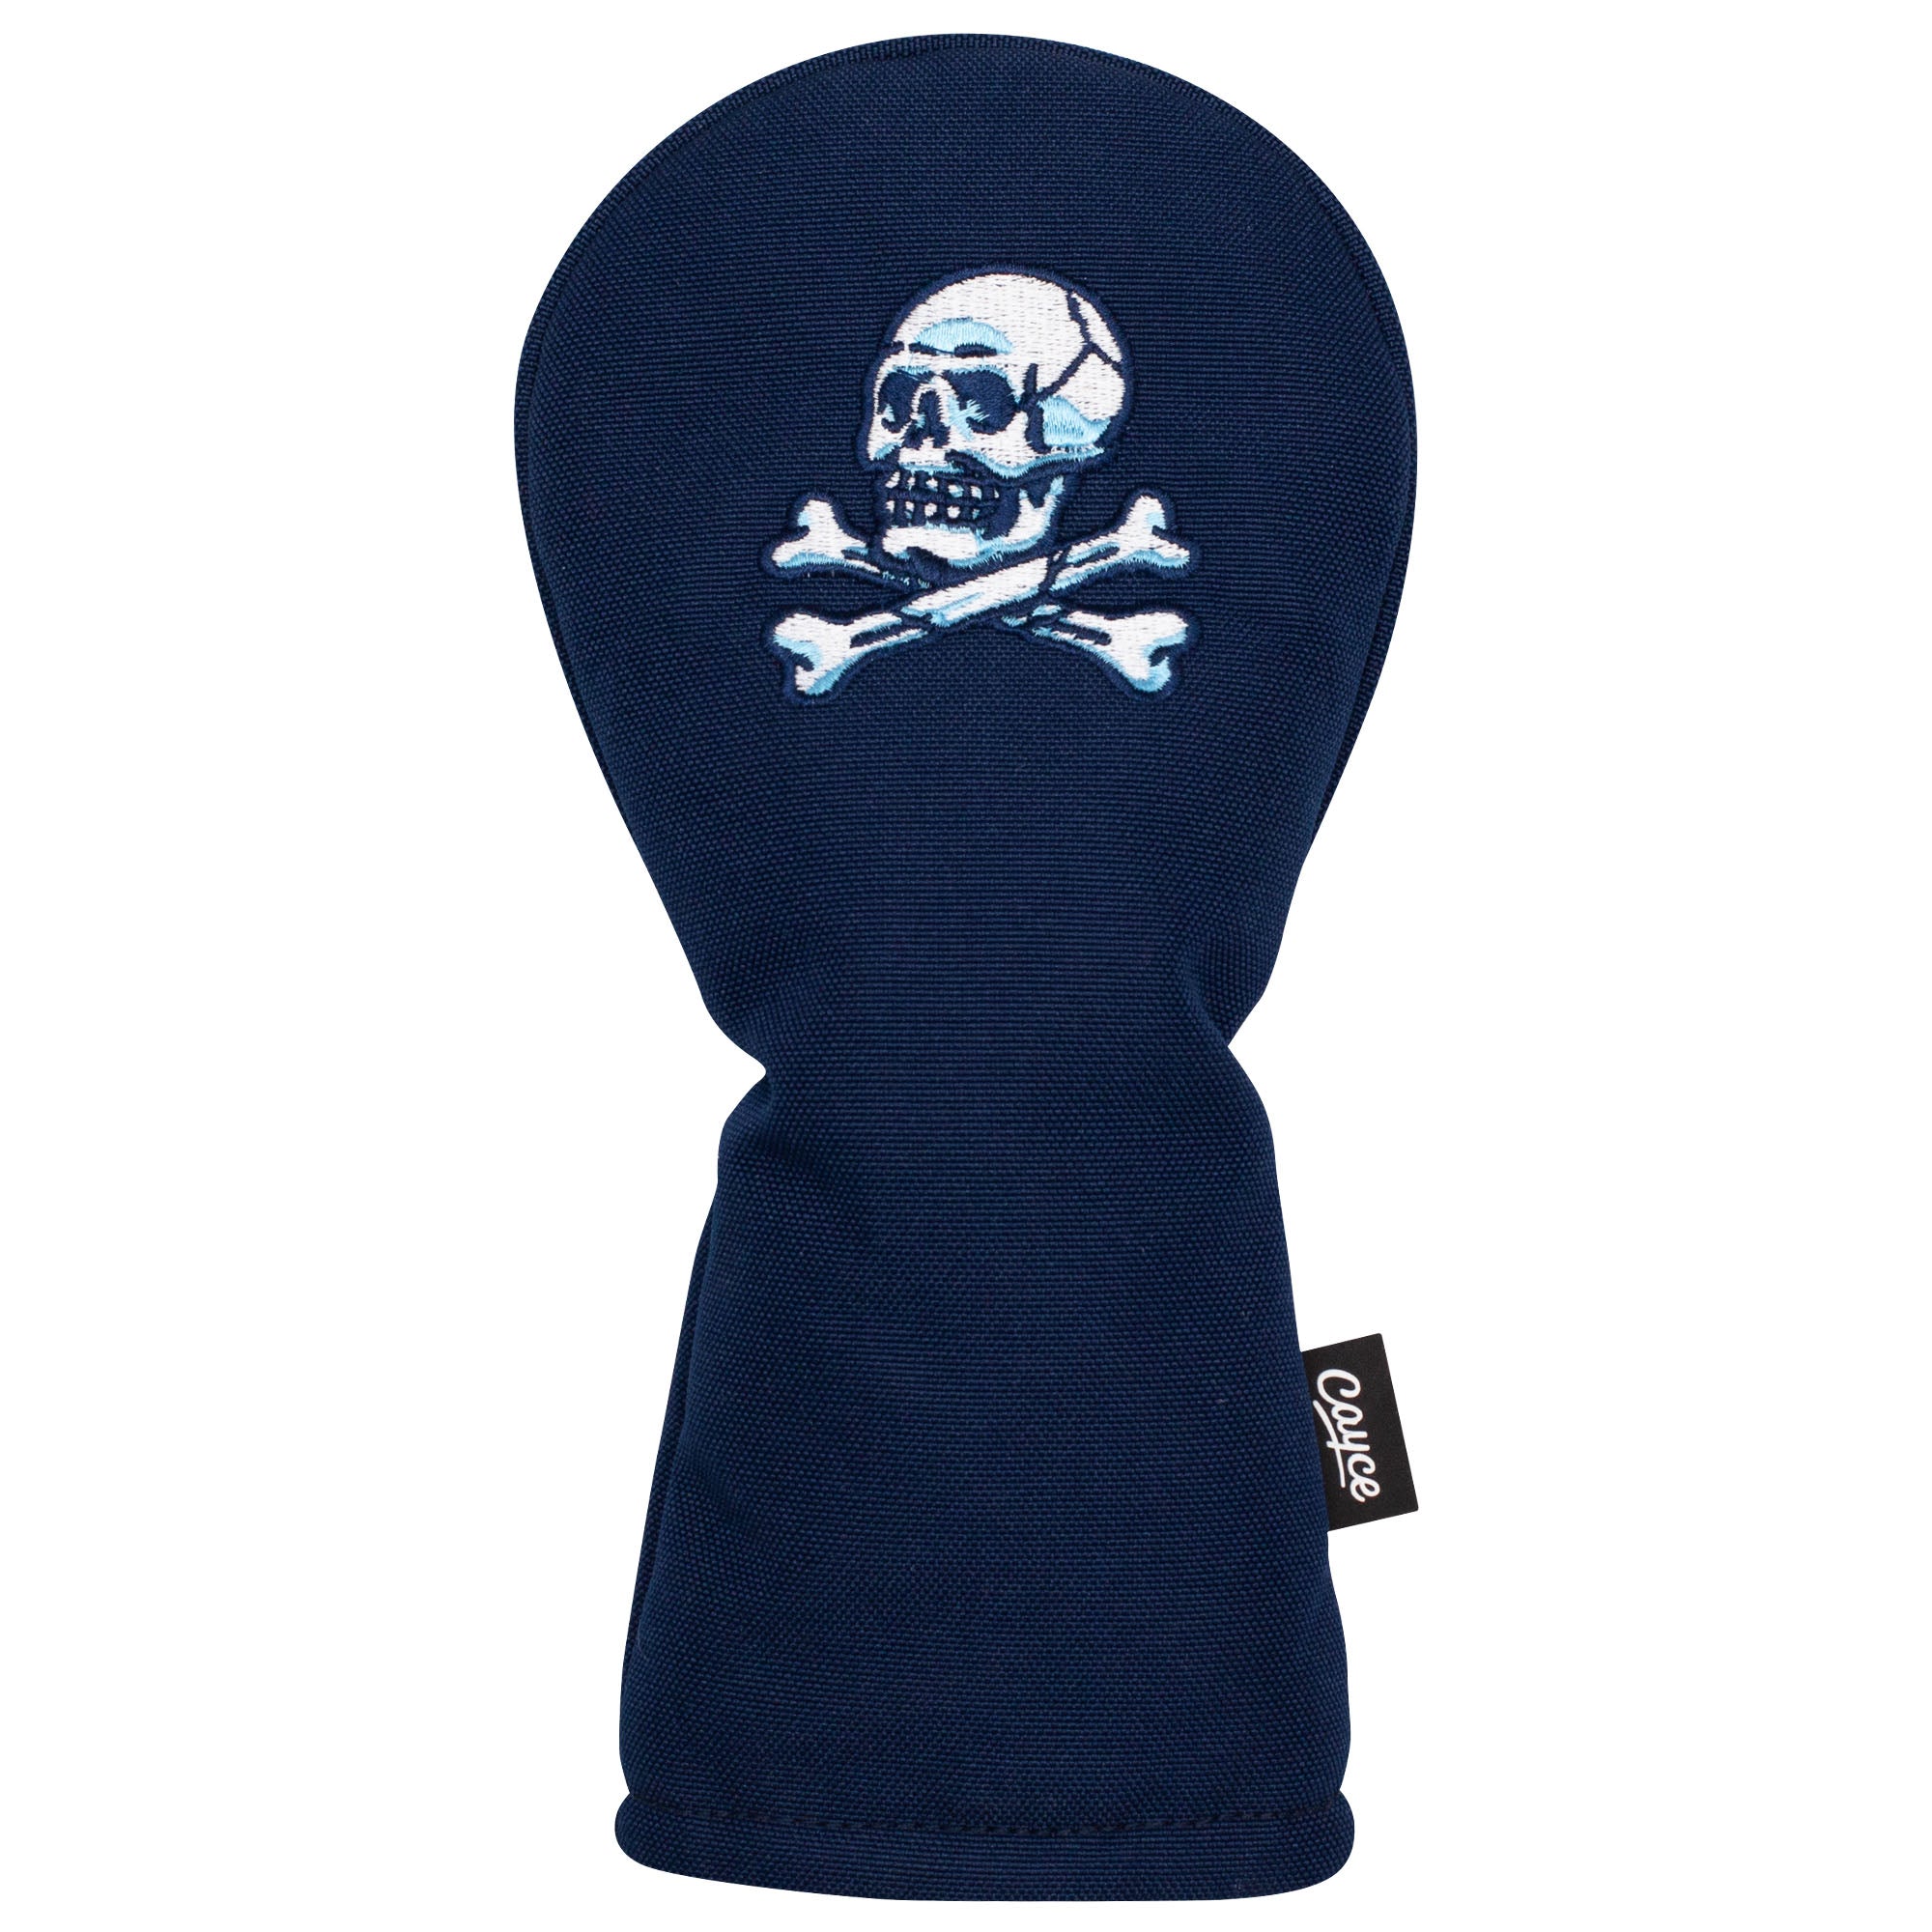 A navy, hourglass-shaped hybrid headcover cover for golf with an embroidered skull and crossbones logo. 